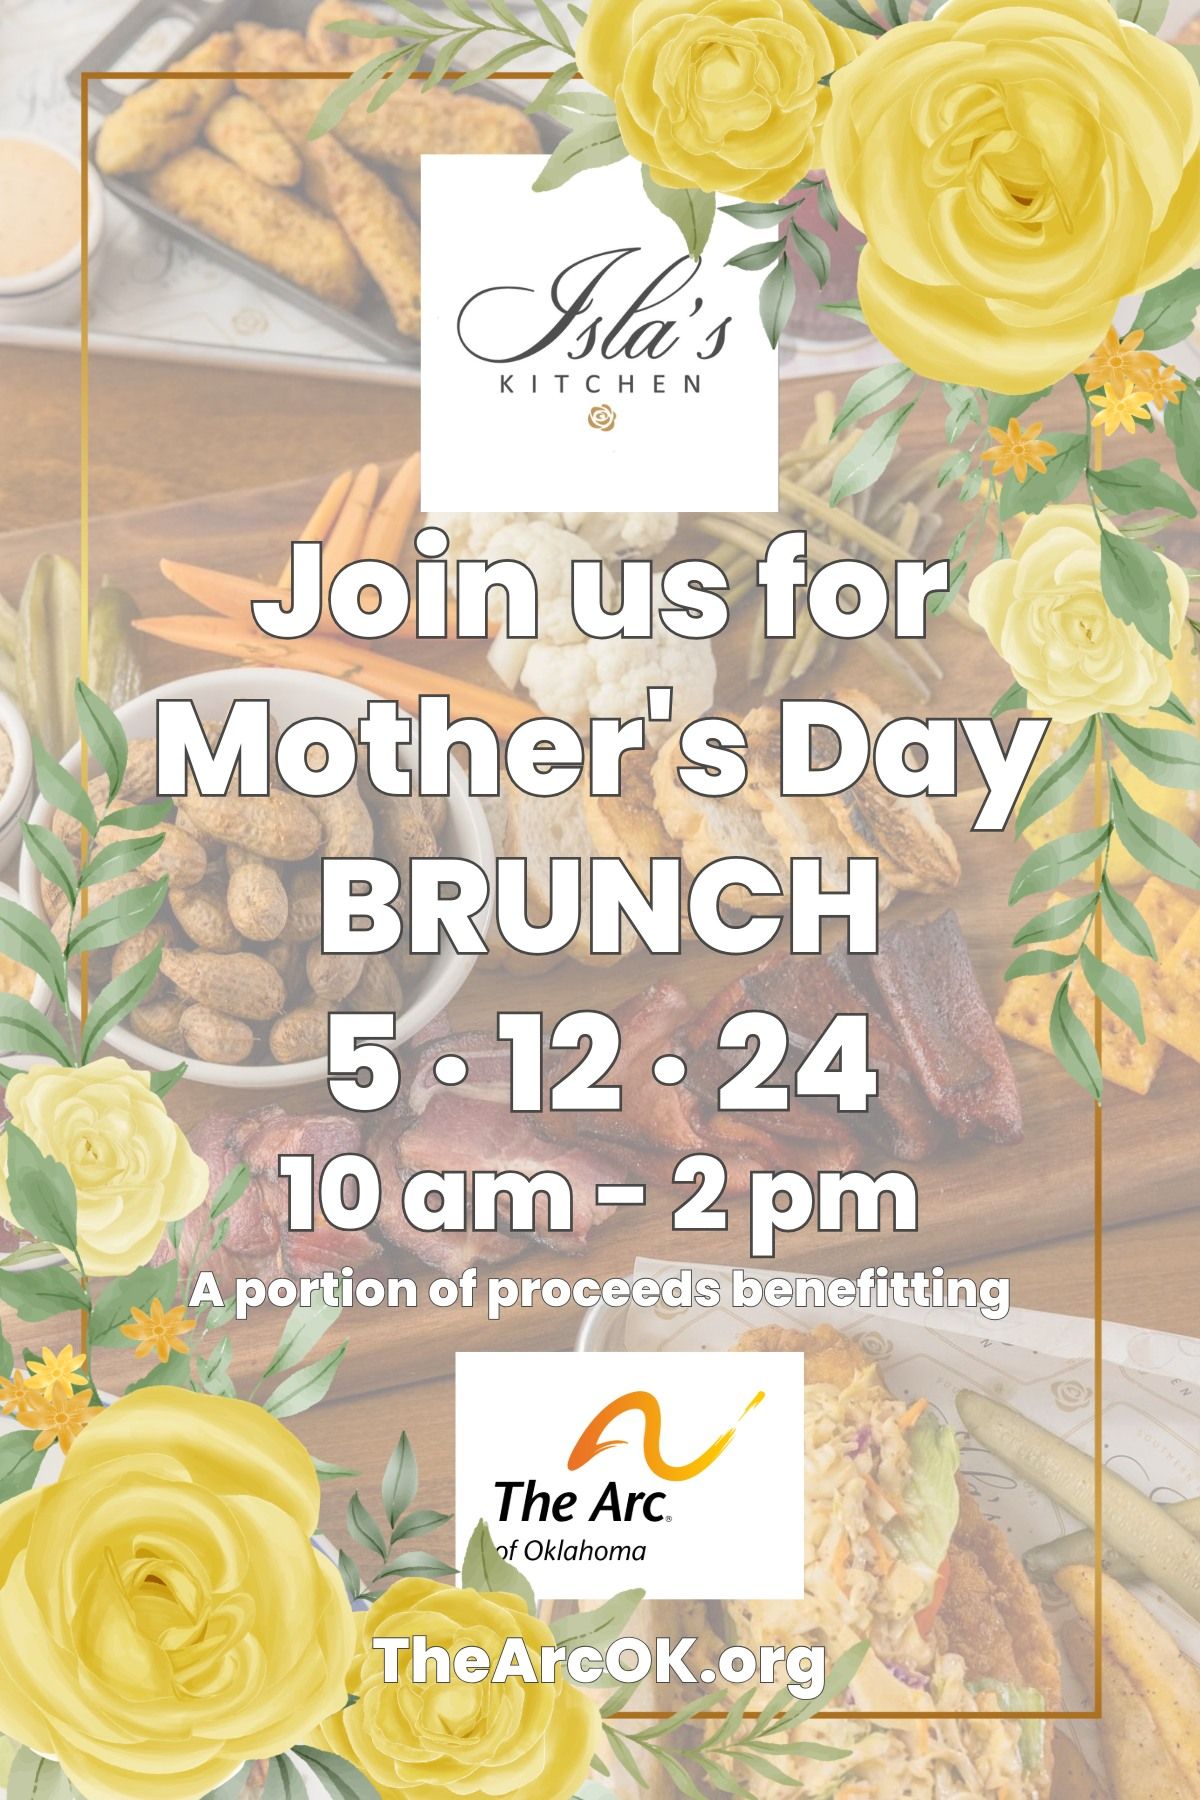 Mother's Day Brunch at Isla's Benefitting The Arc!